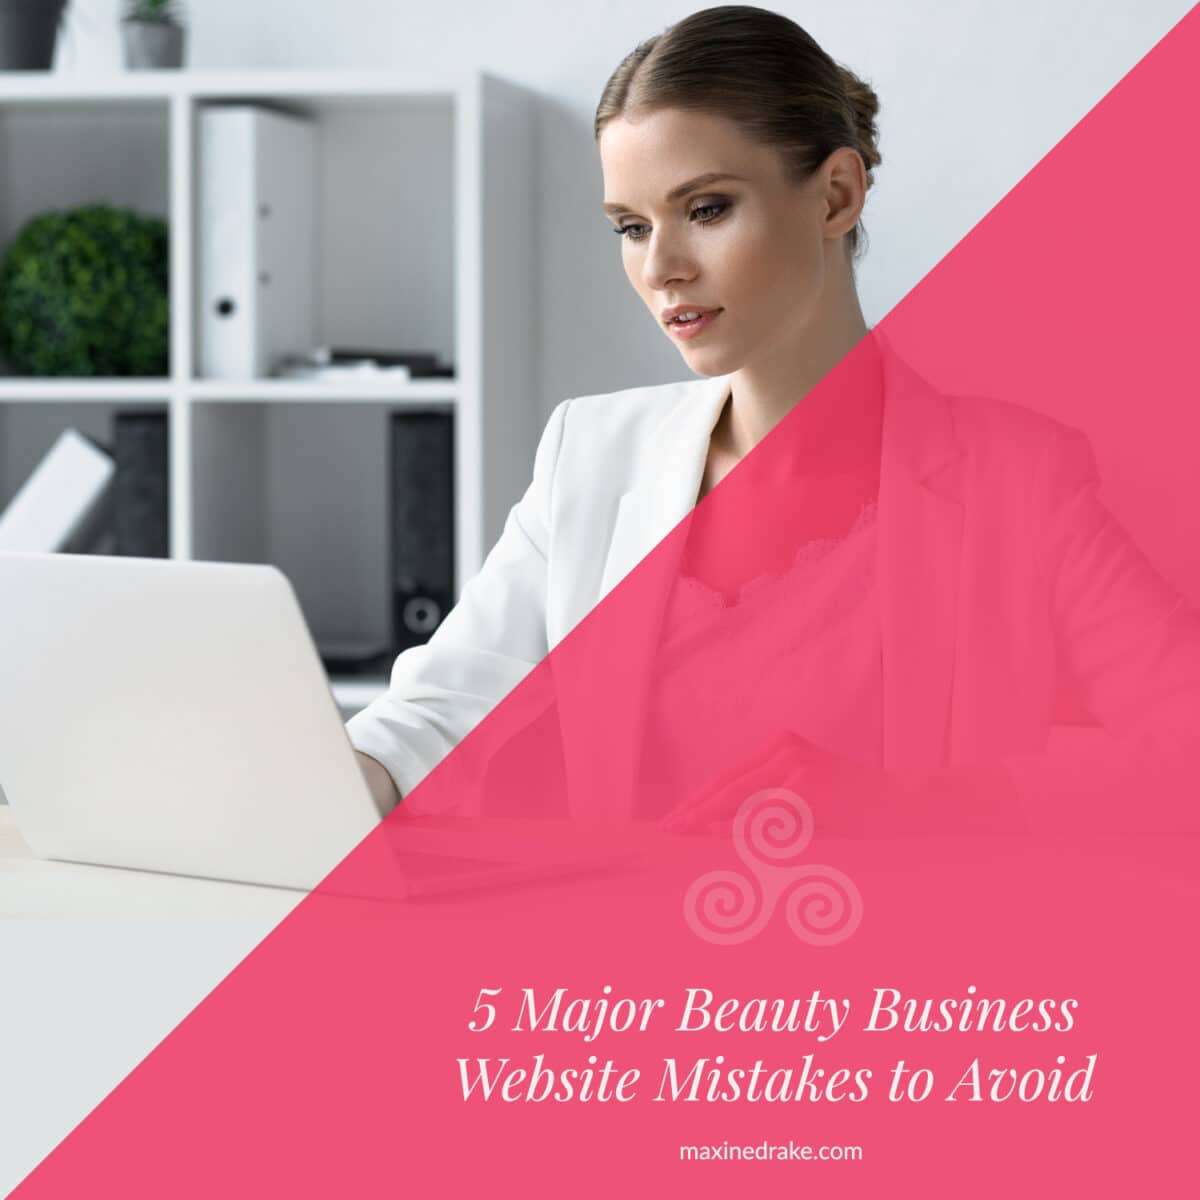 Five Major Beauty Business Website Mistakes to Avoid